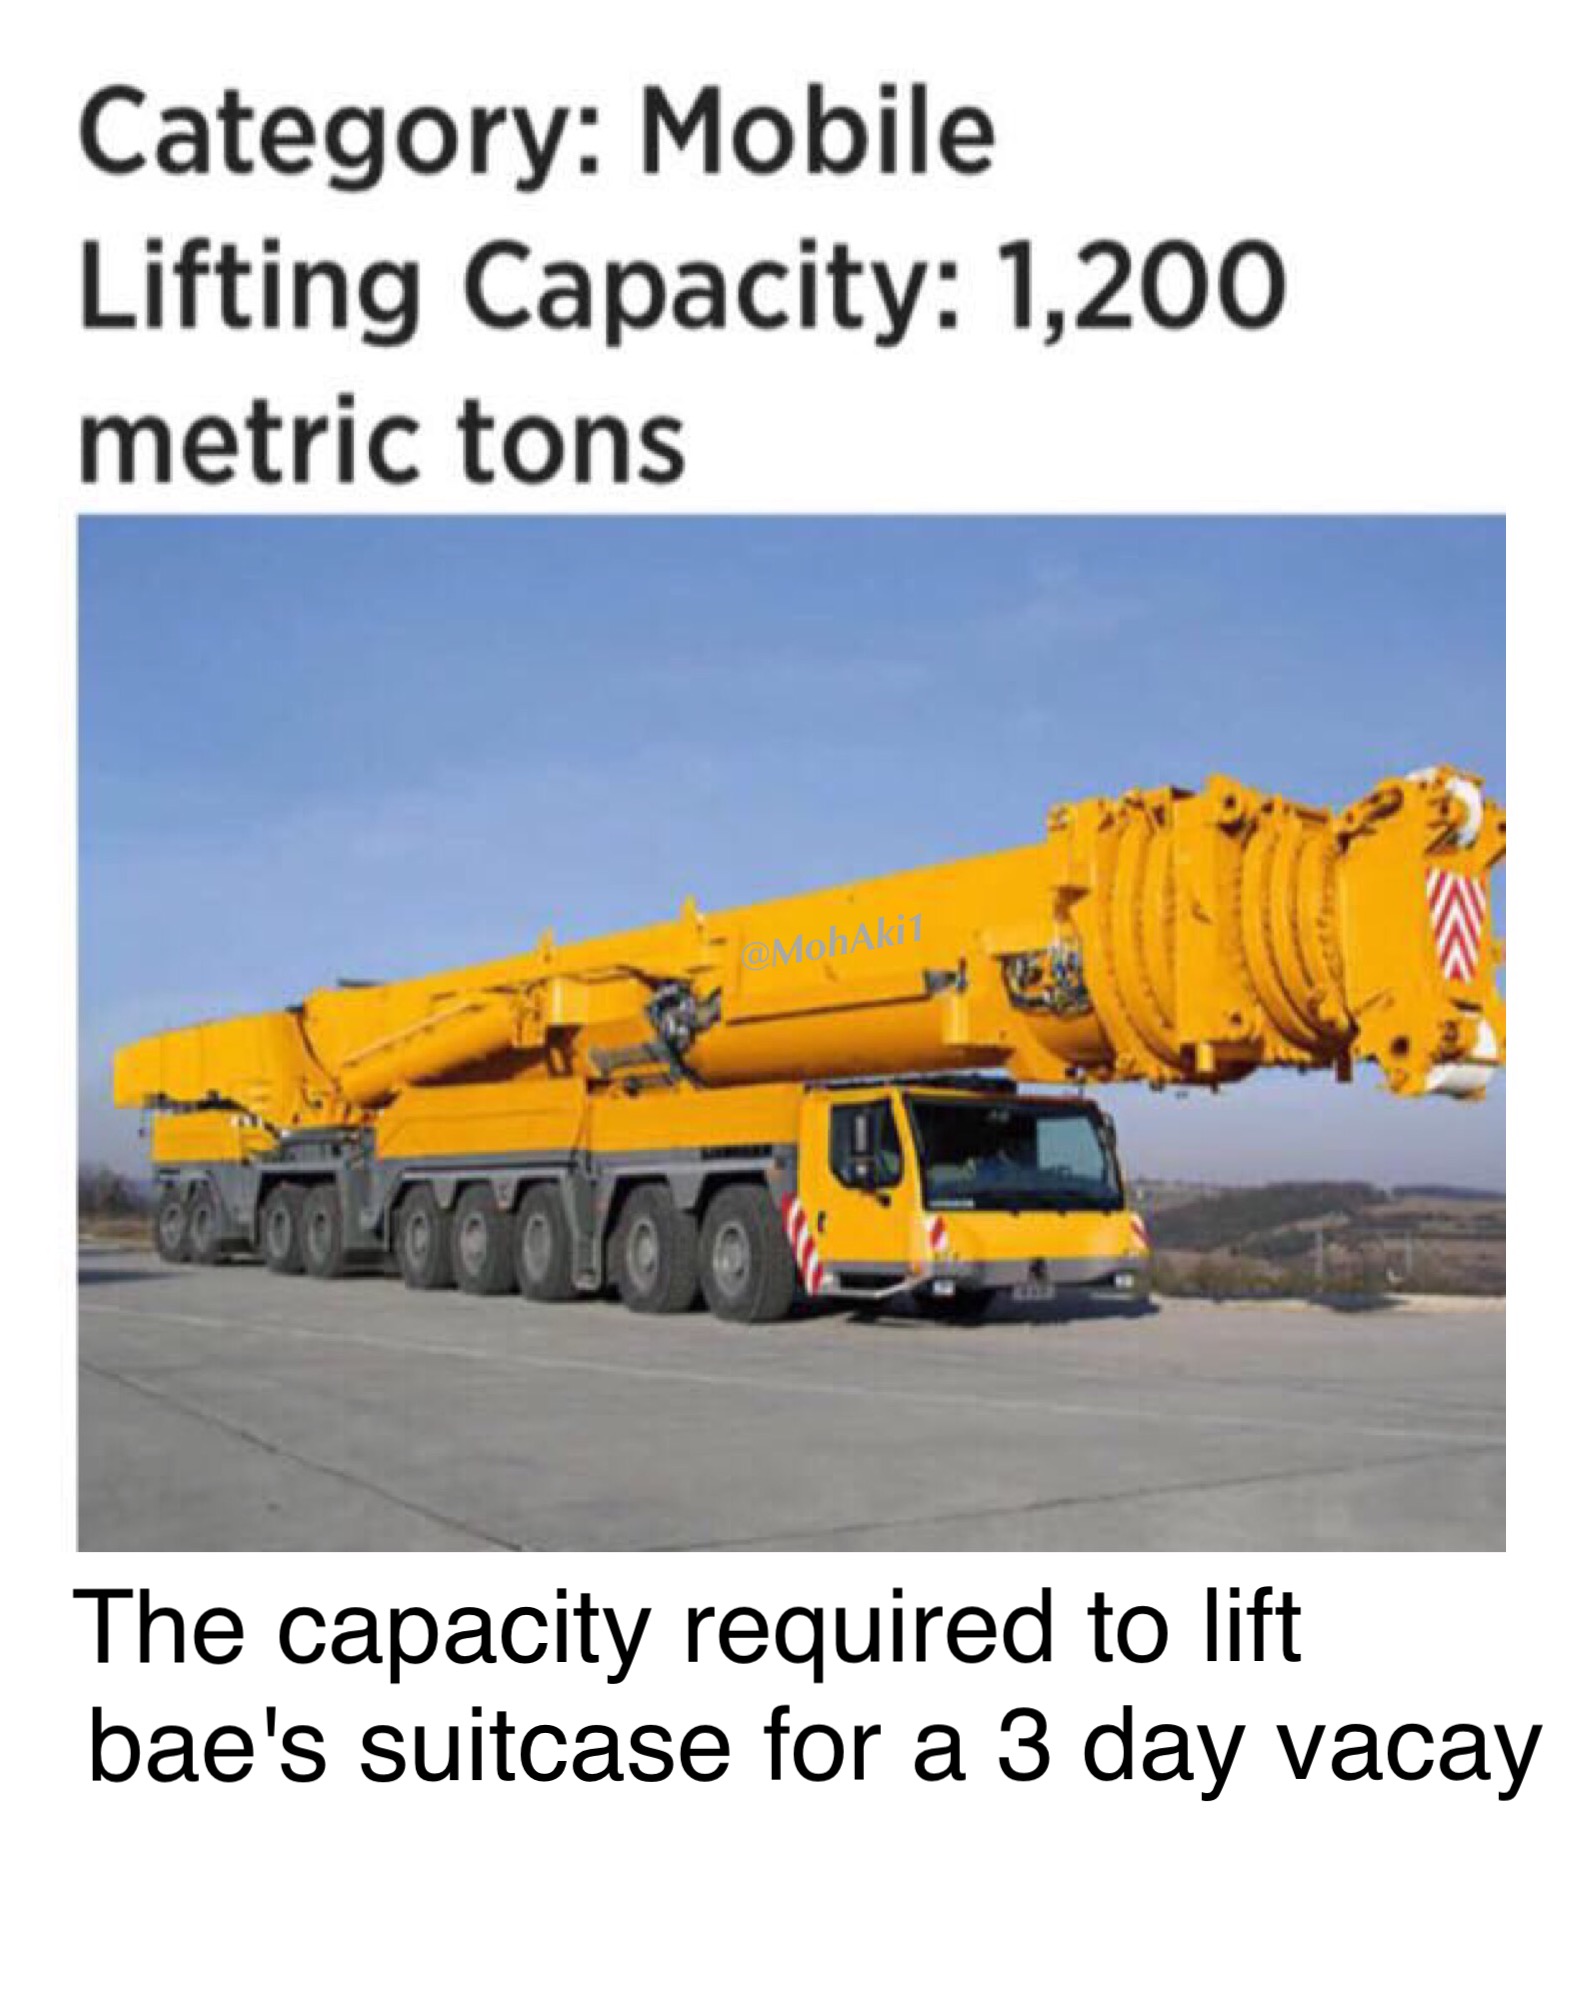 meme - liebherr ltm 11200 9.1 - Category Mobile Lifting Capacity 1,200 metric tons The capacity required to lift bae's suitcase for a 3 day vacay